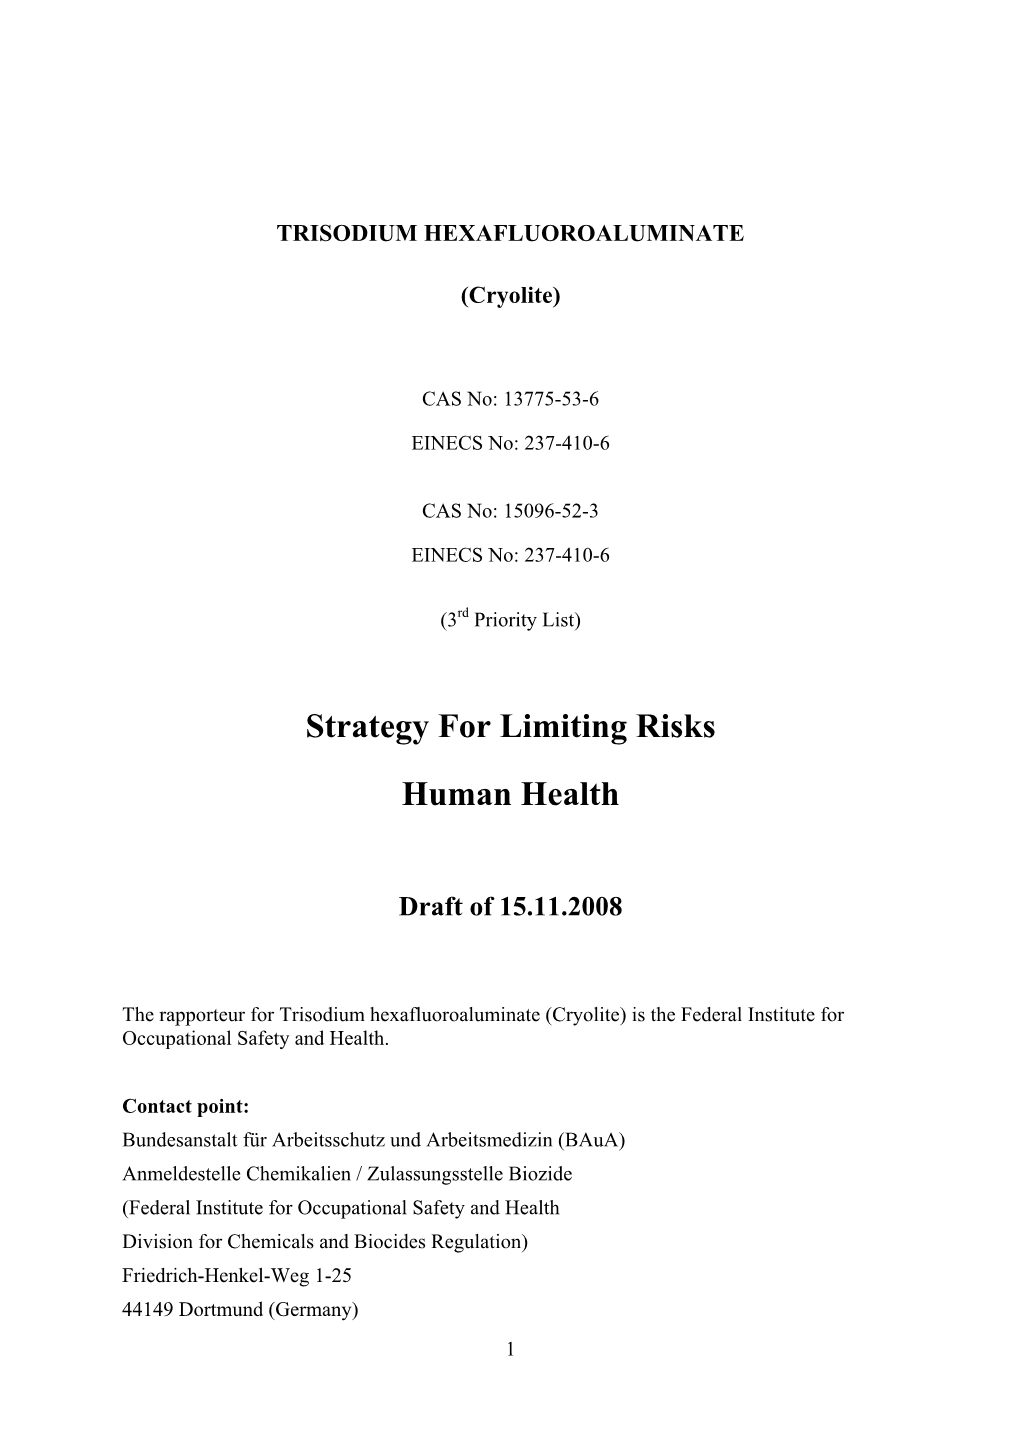 Strategy for Limiting Risks Human Health